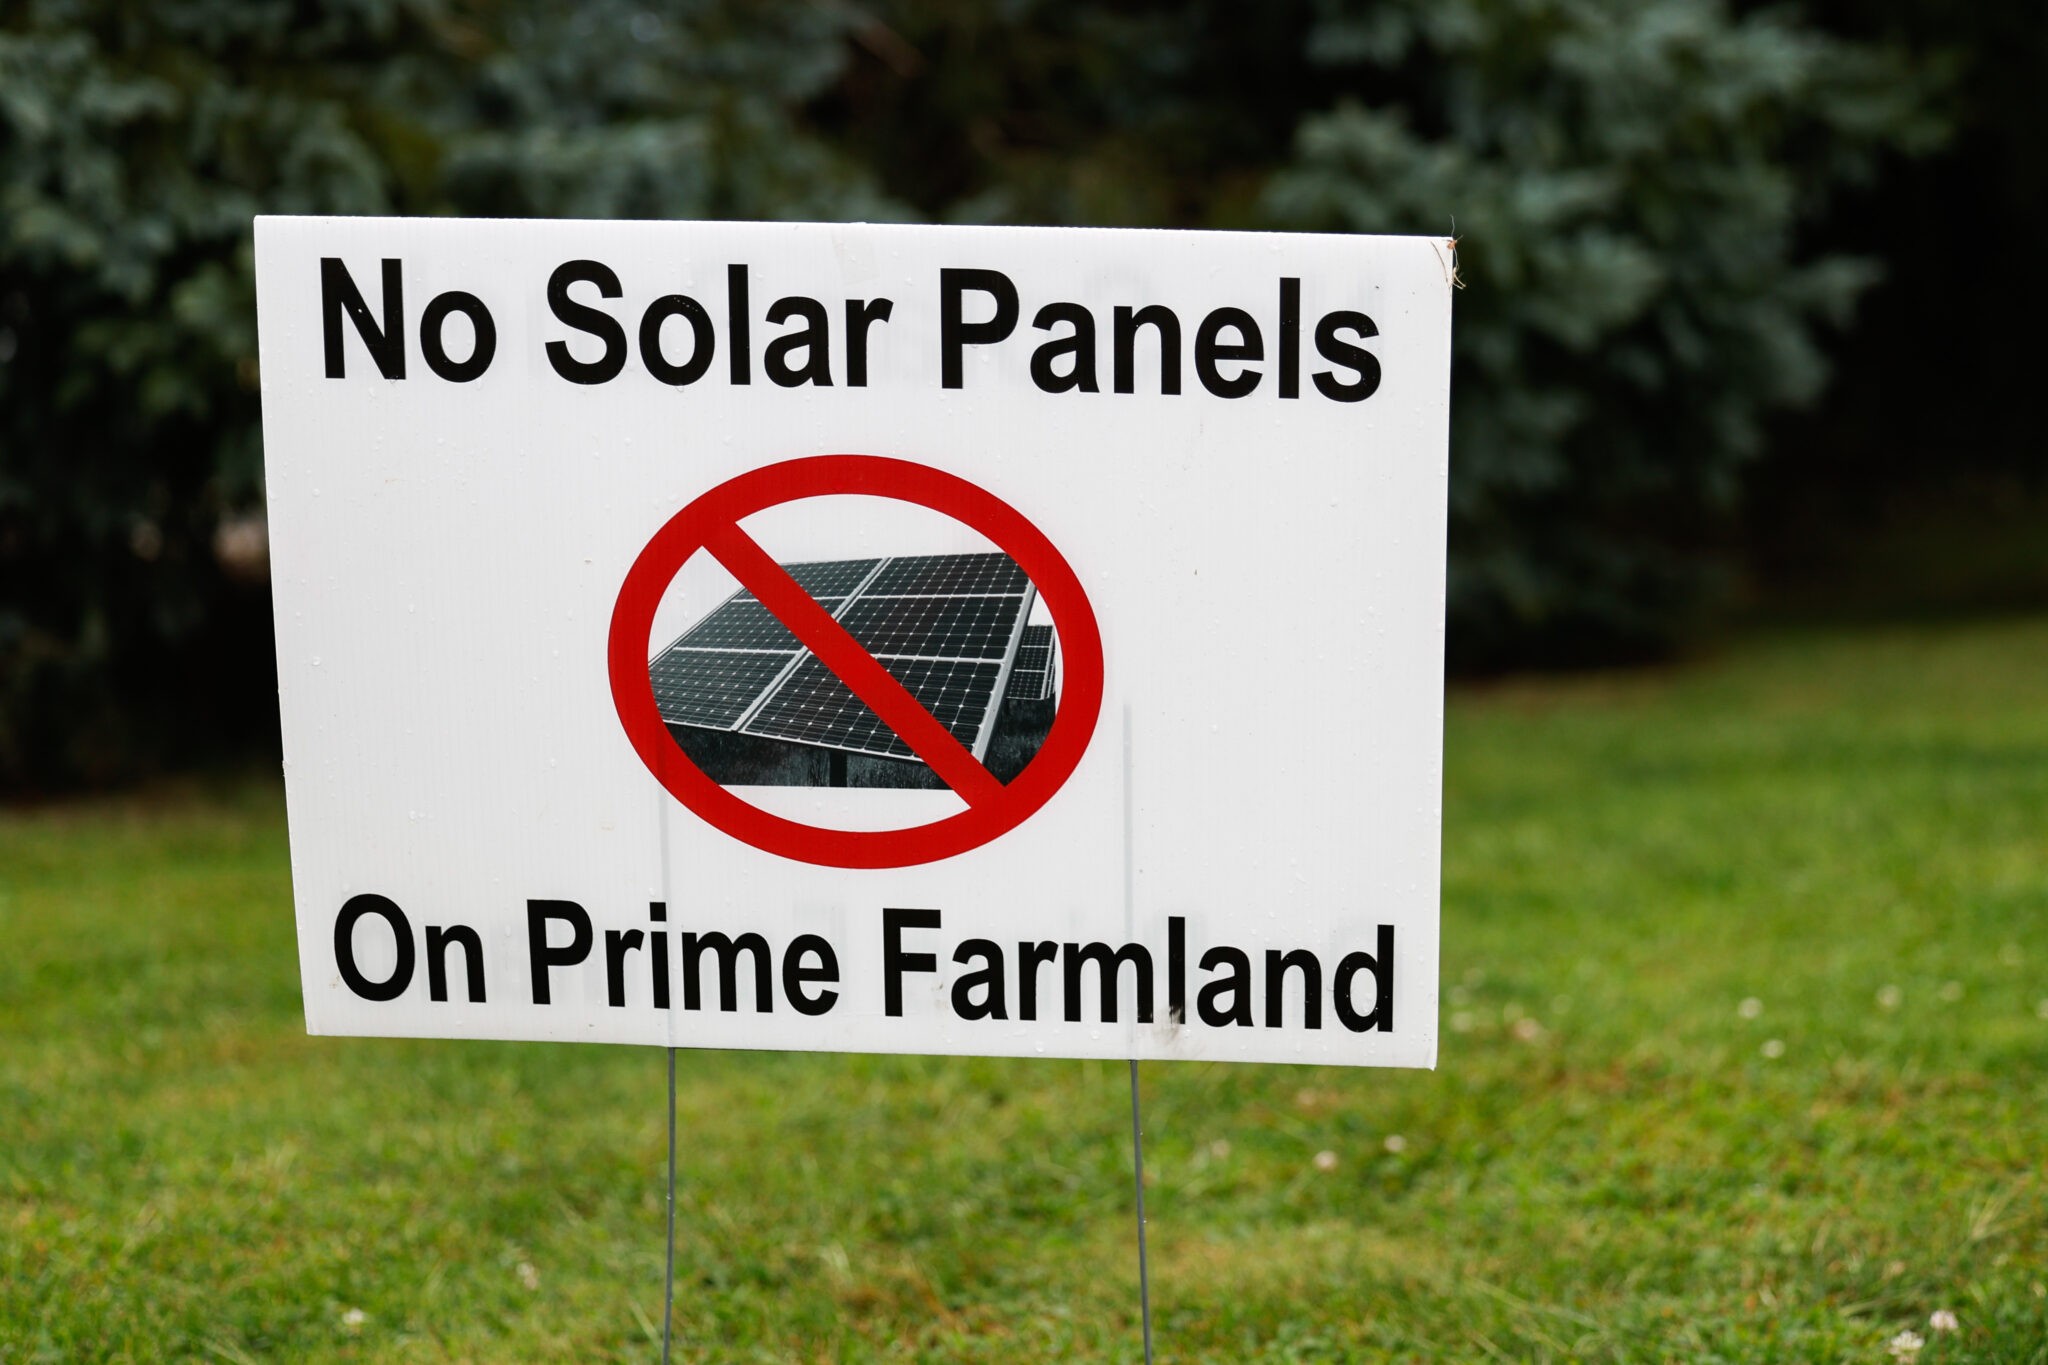 Ohio May Soon Kill a Solar Project Due to Concerns Over 'Rural Aesthetic' | Ohio News | Cleveland | Cleveland Scene